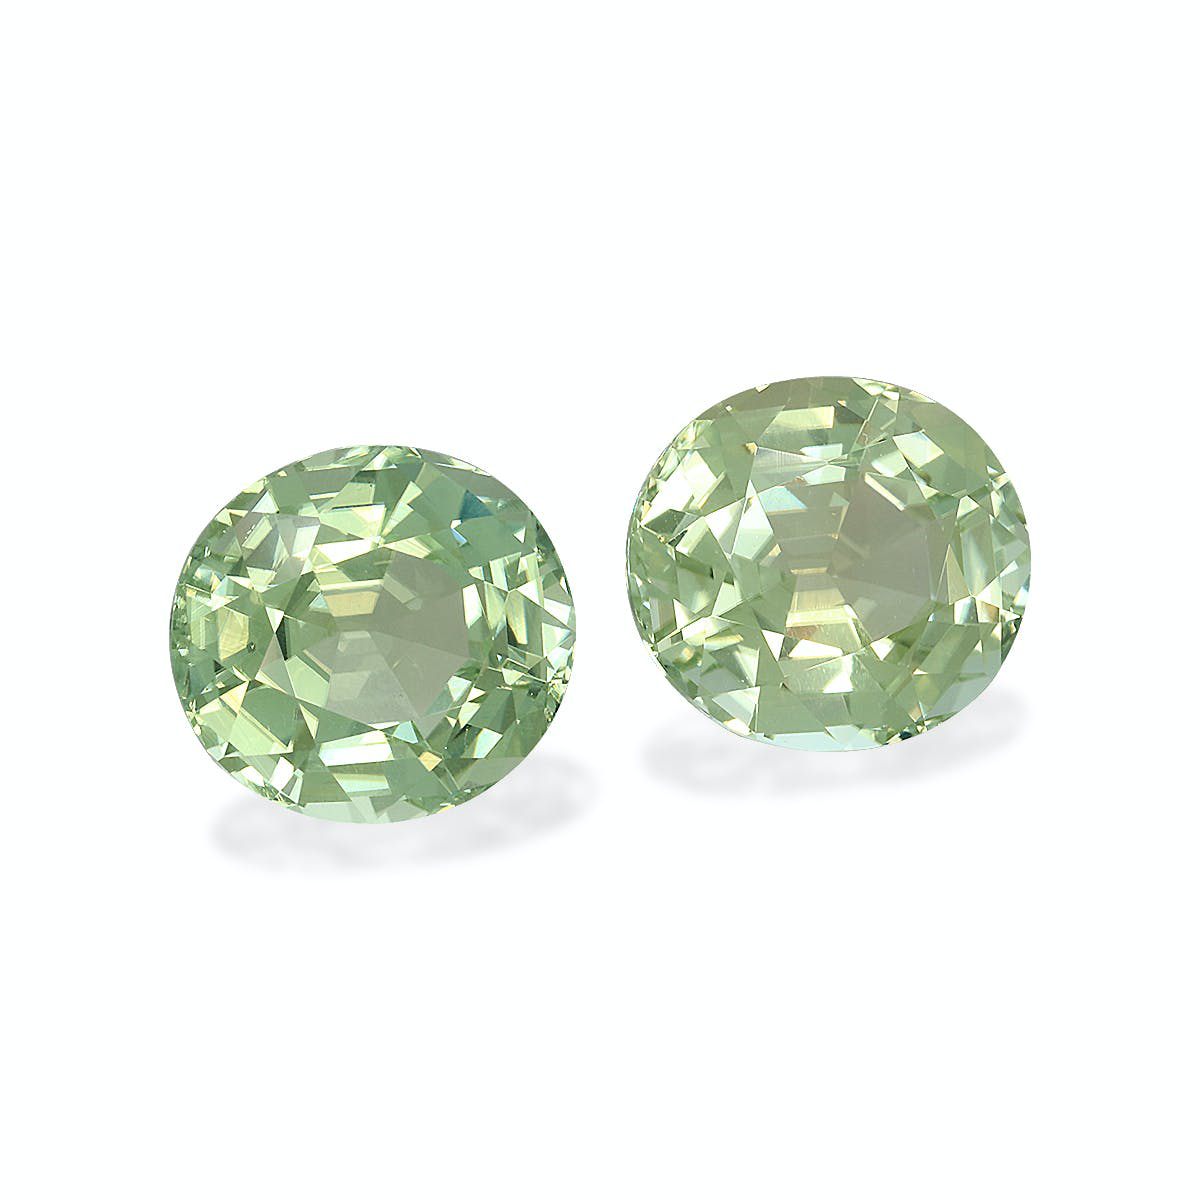 Picture of Mist Green Tourmaline 14.99ct - Pair (TG1368)